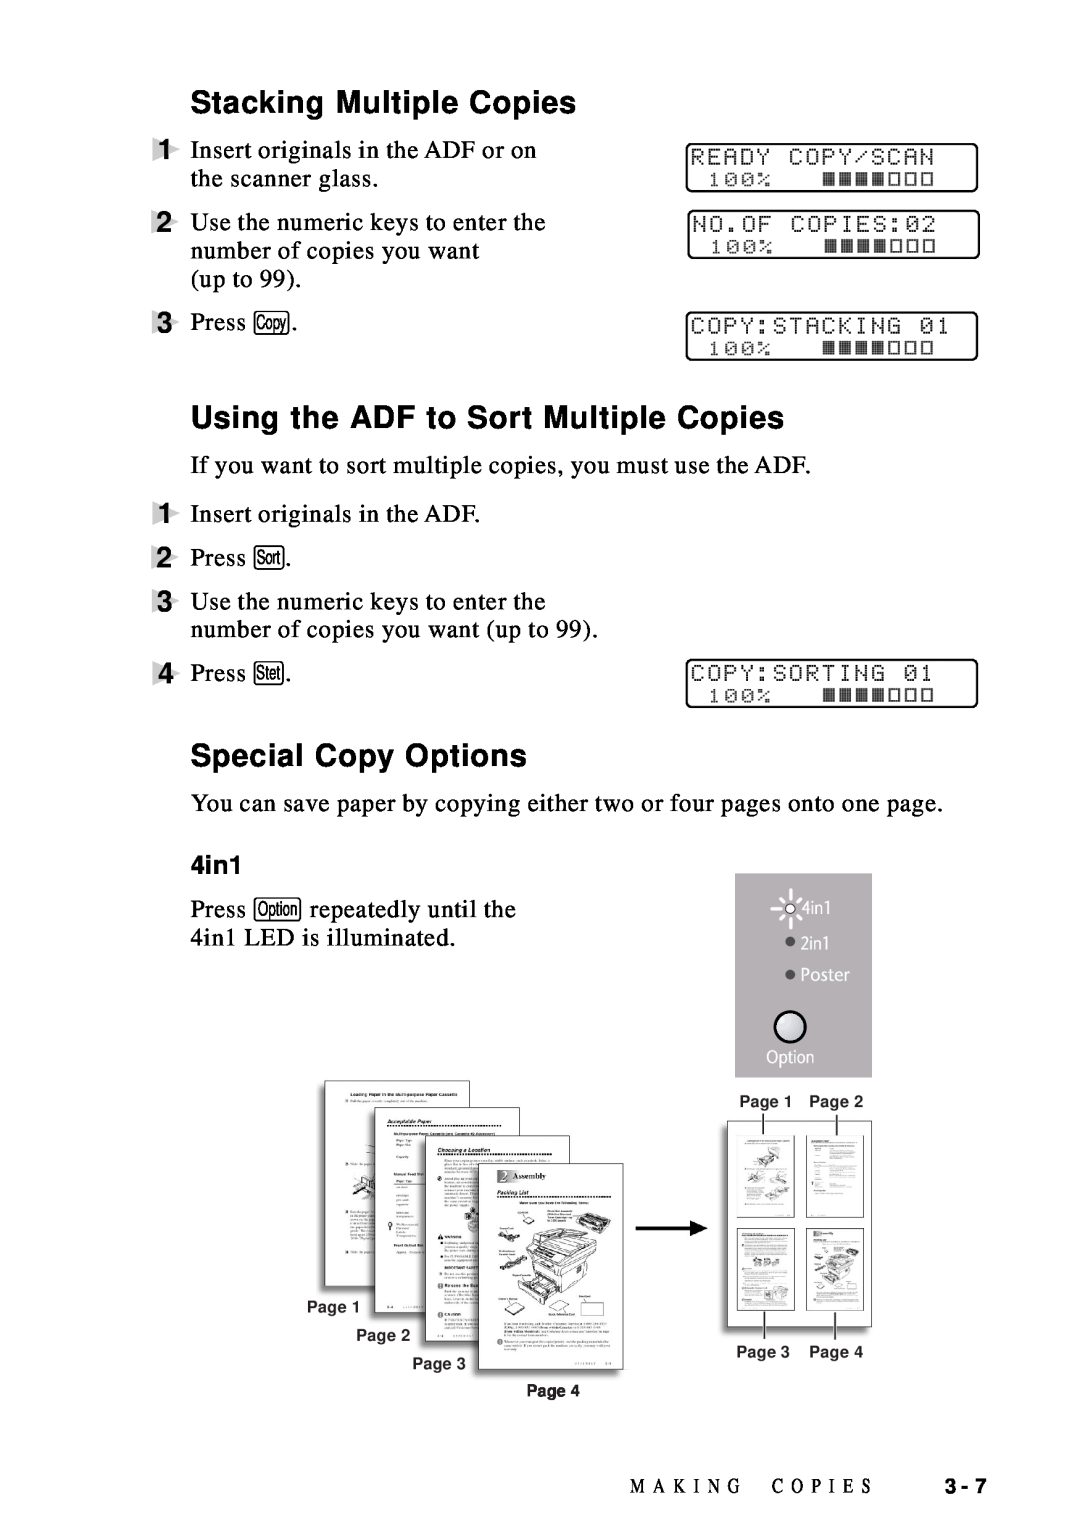 Brother DCP1200 manual Stacking Multiple Copies, Using the ADF to Sort Multiple Copies, Special Copy Options, 4in1 